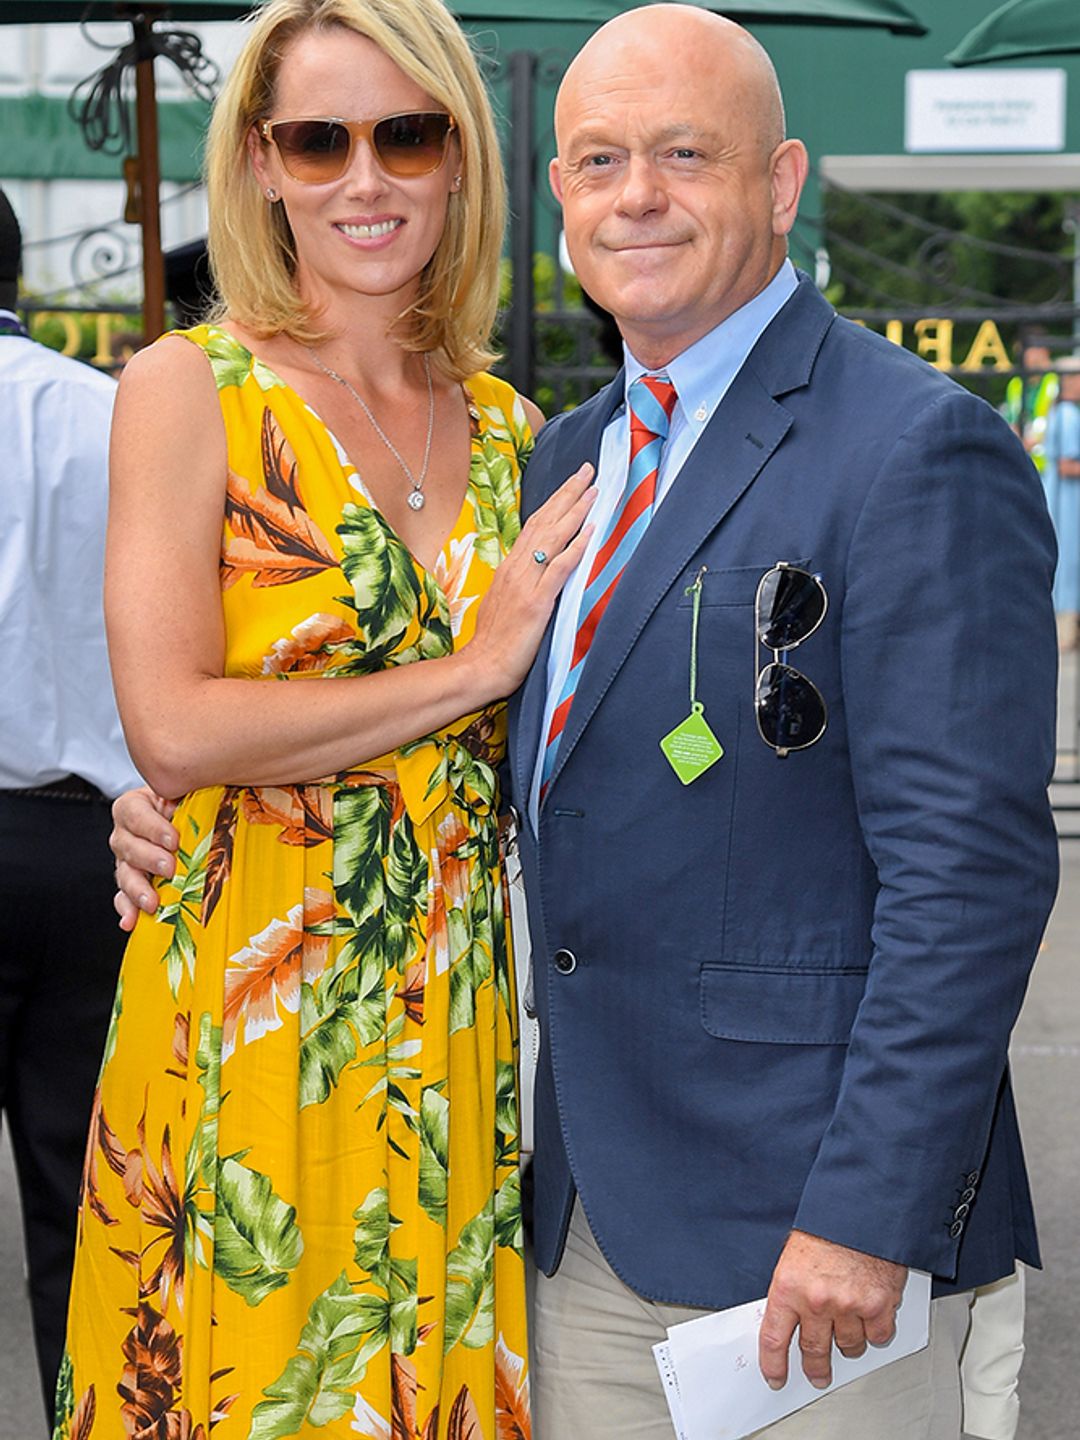 Ross Kemp and Renee O'Brien at the Wimbledon Tennis Championship in 2019